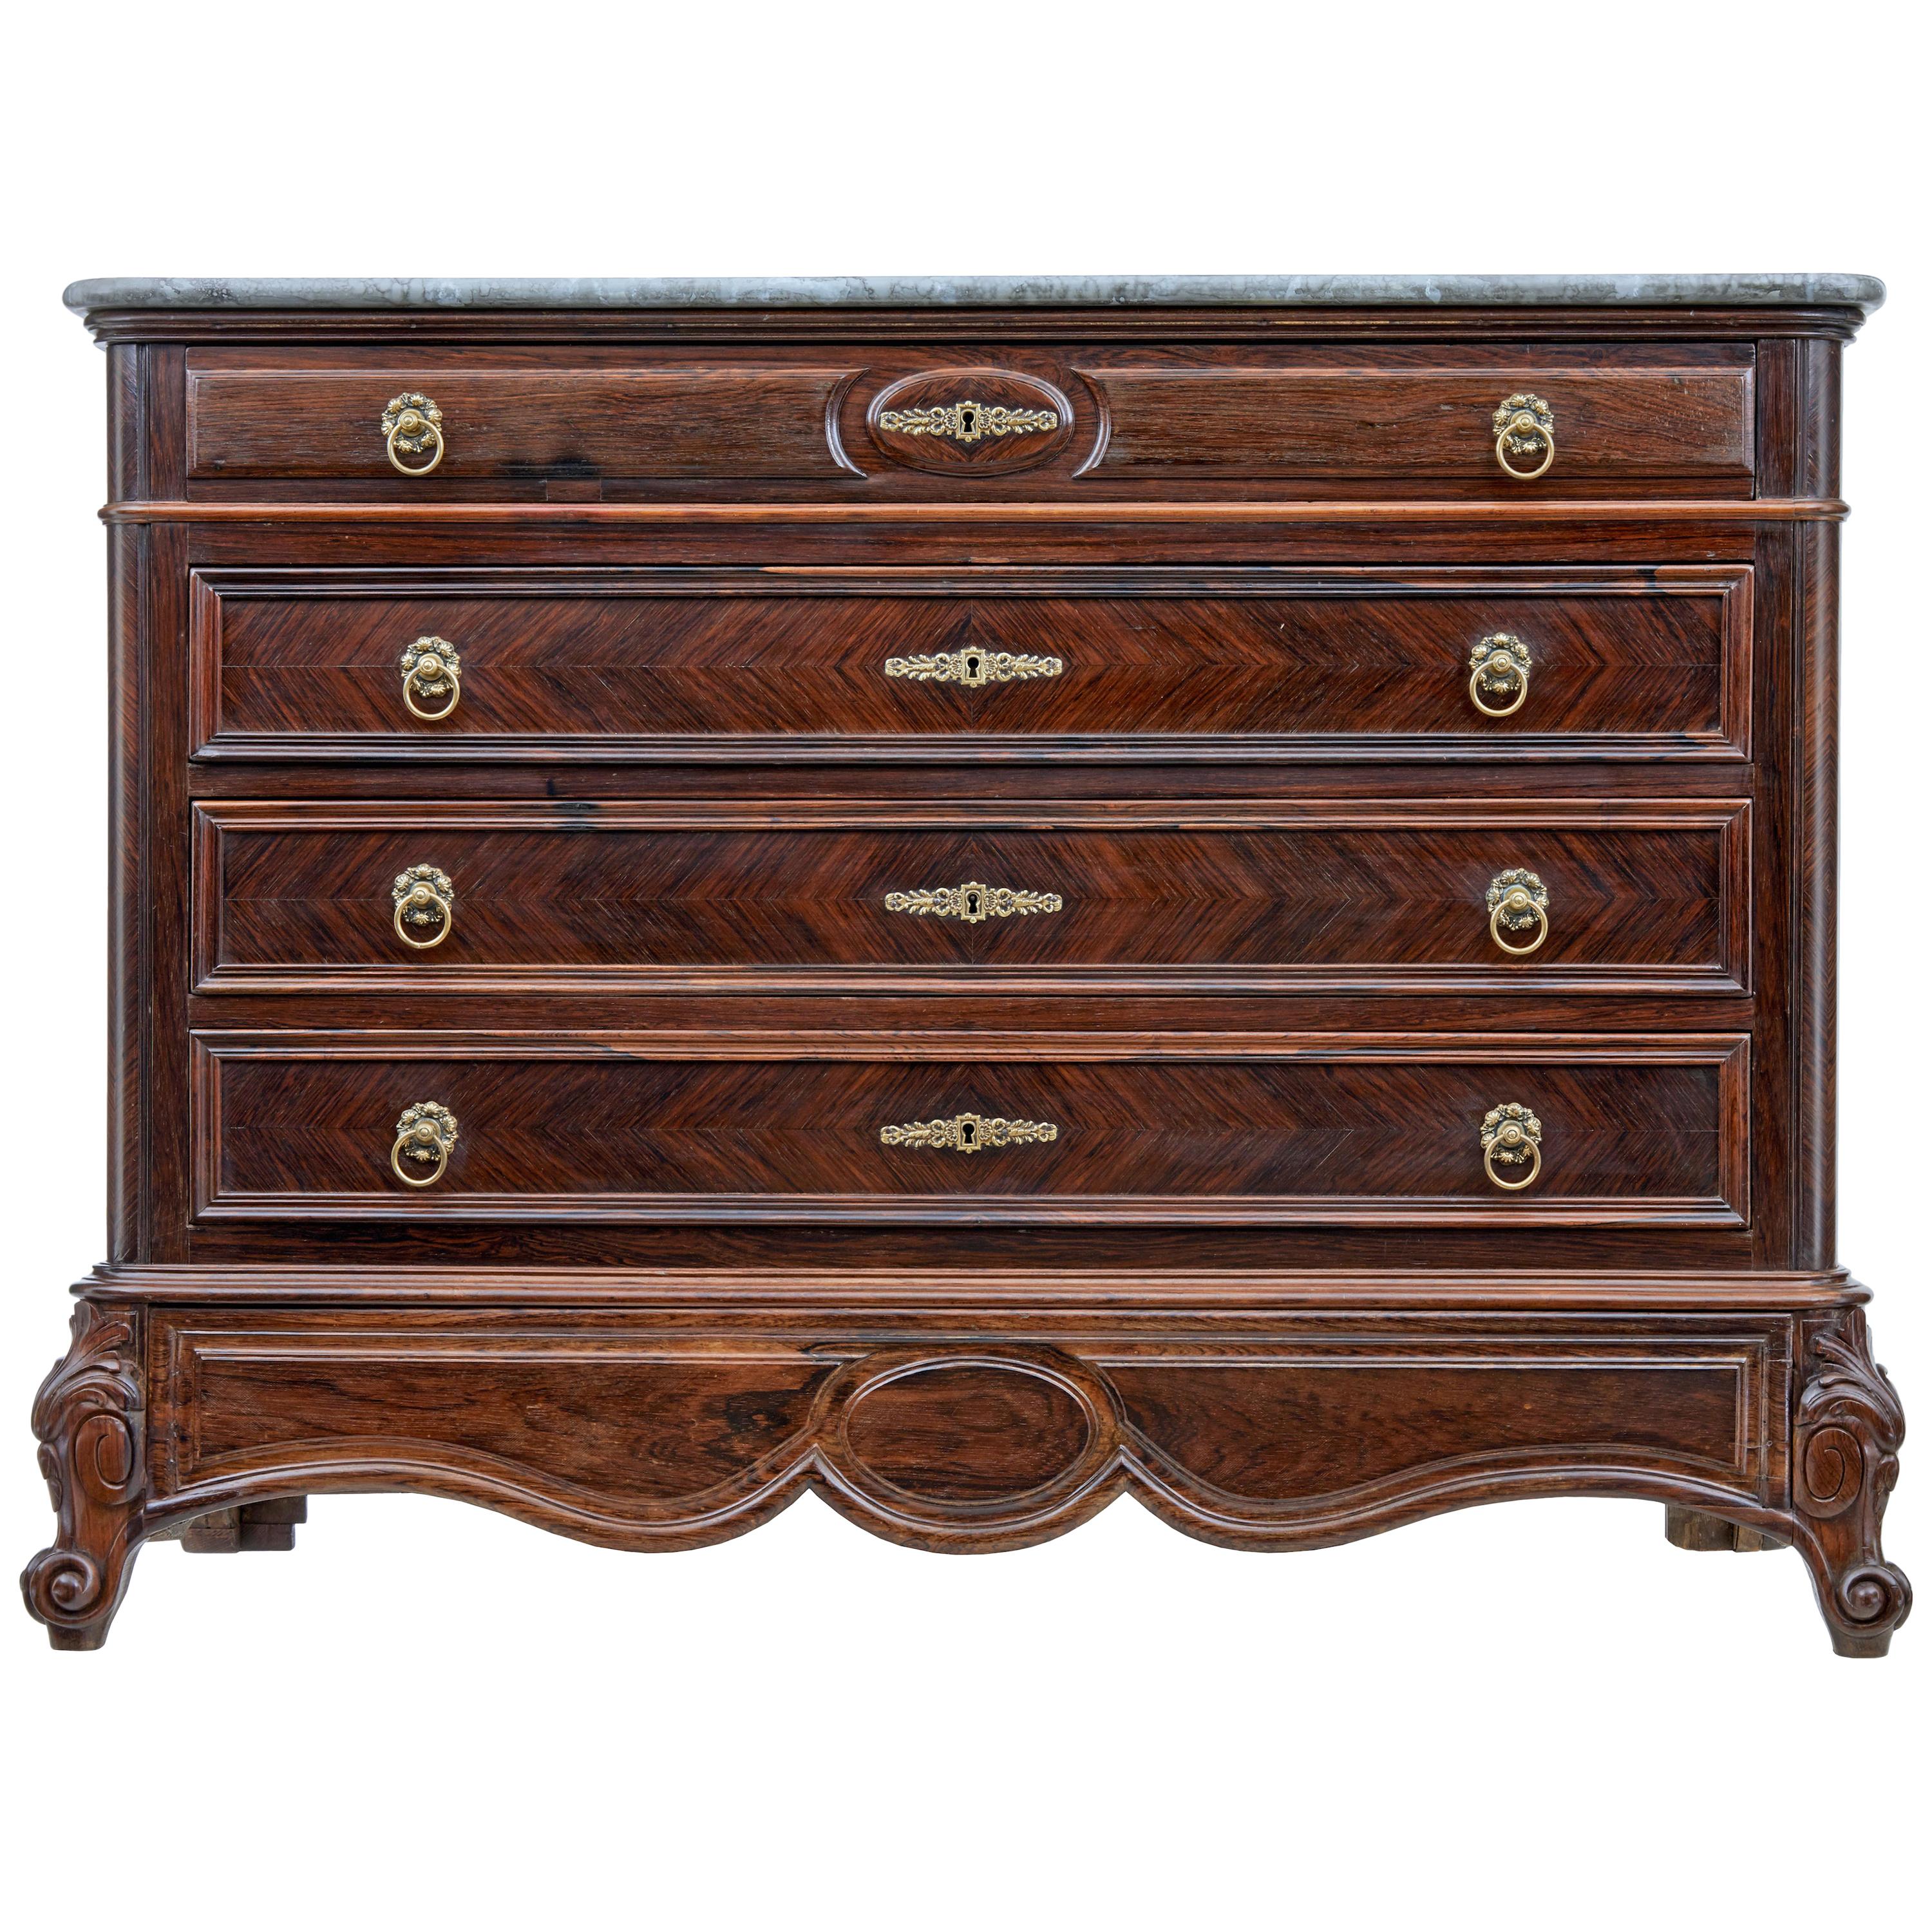 Large 19th Century French Palisander Chest of Drawers